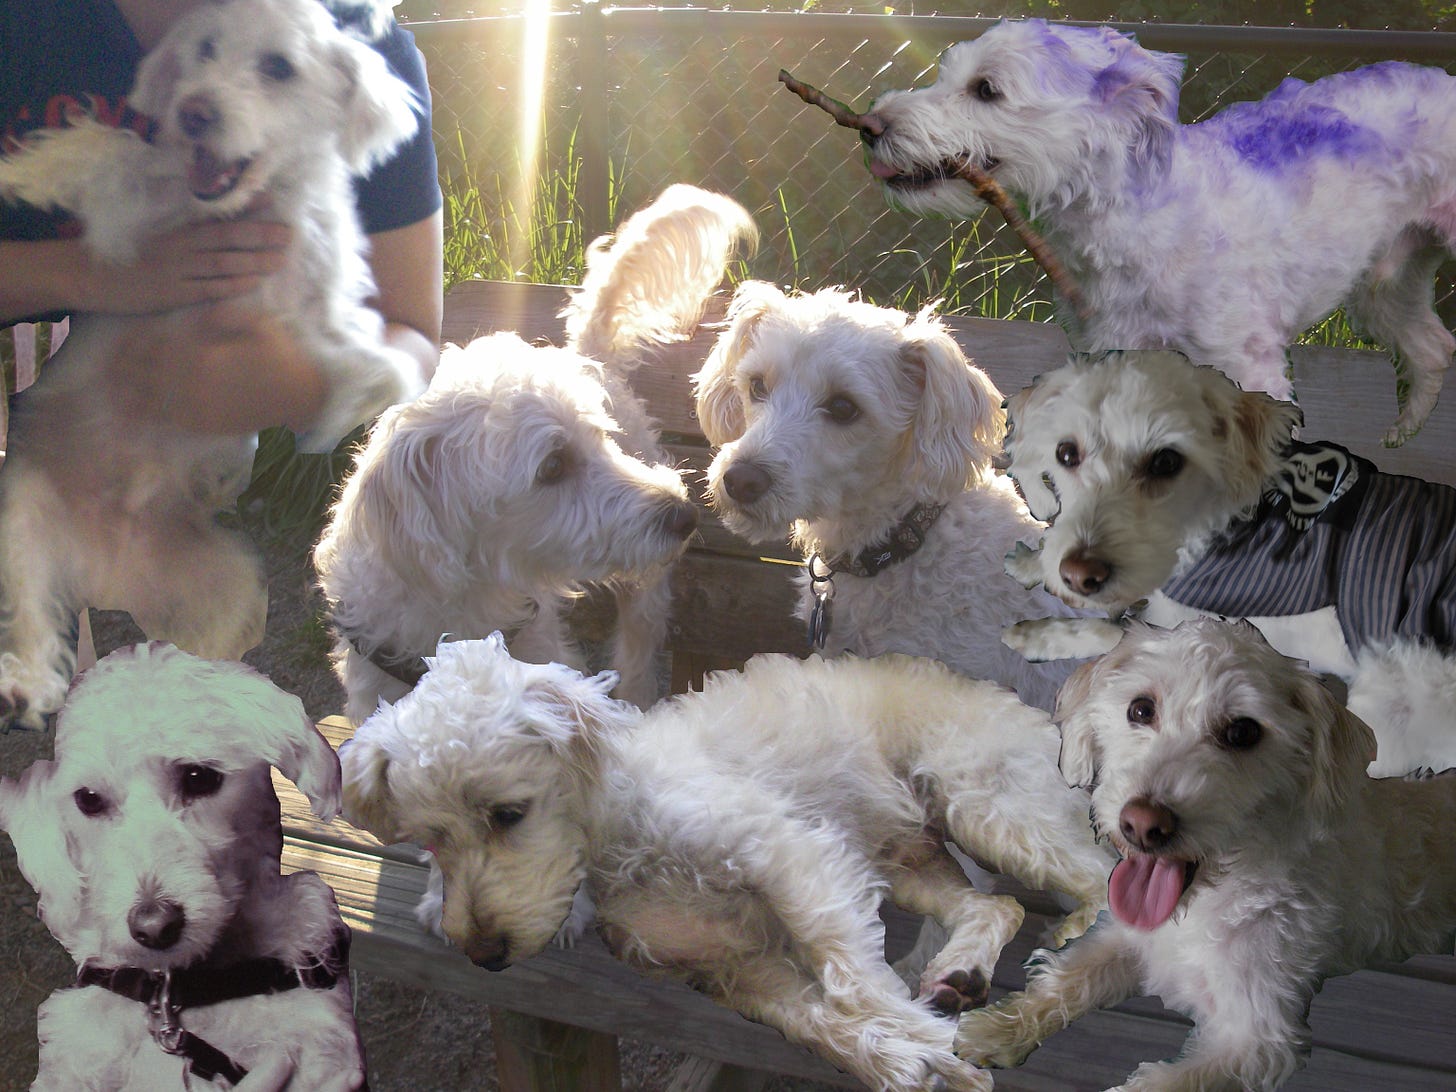 A collage of photos of a fluffy white dog named Lupin. 8 dogs in all.